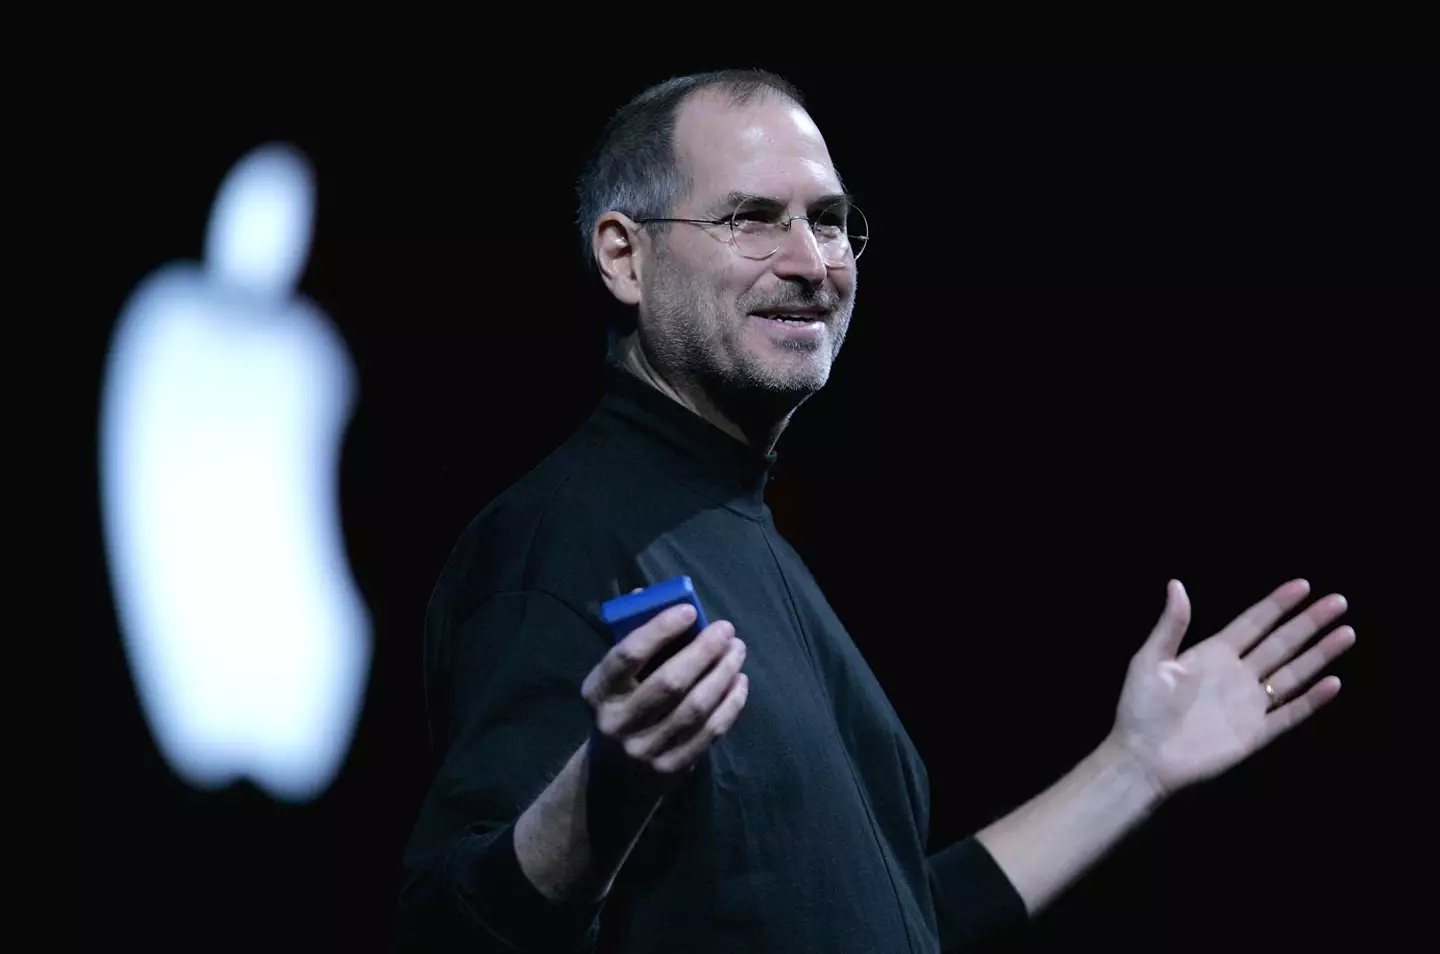 Steve Jobs' beer test is viewed as an ideal interviewing technique by some.